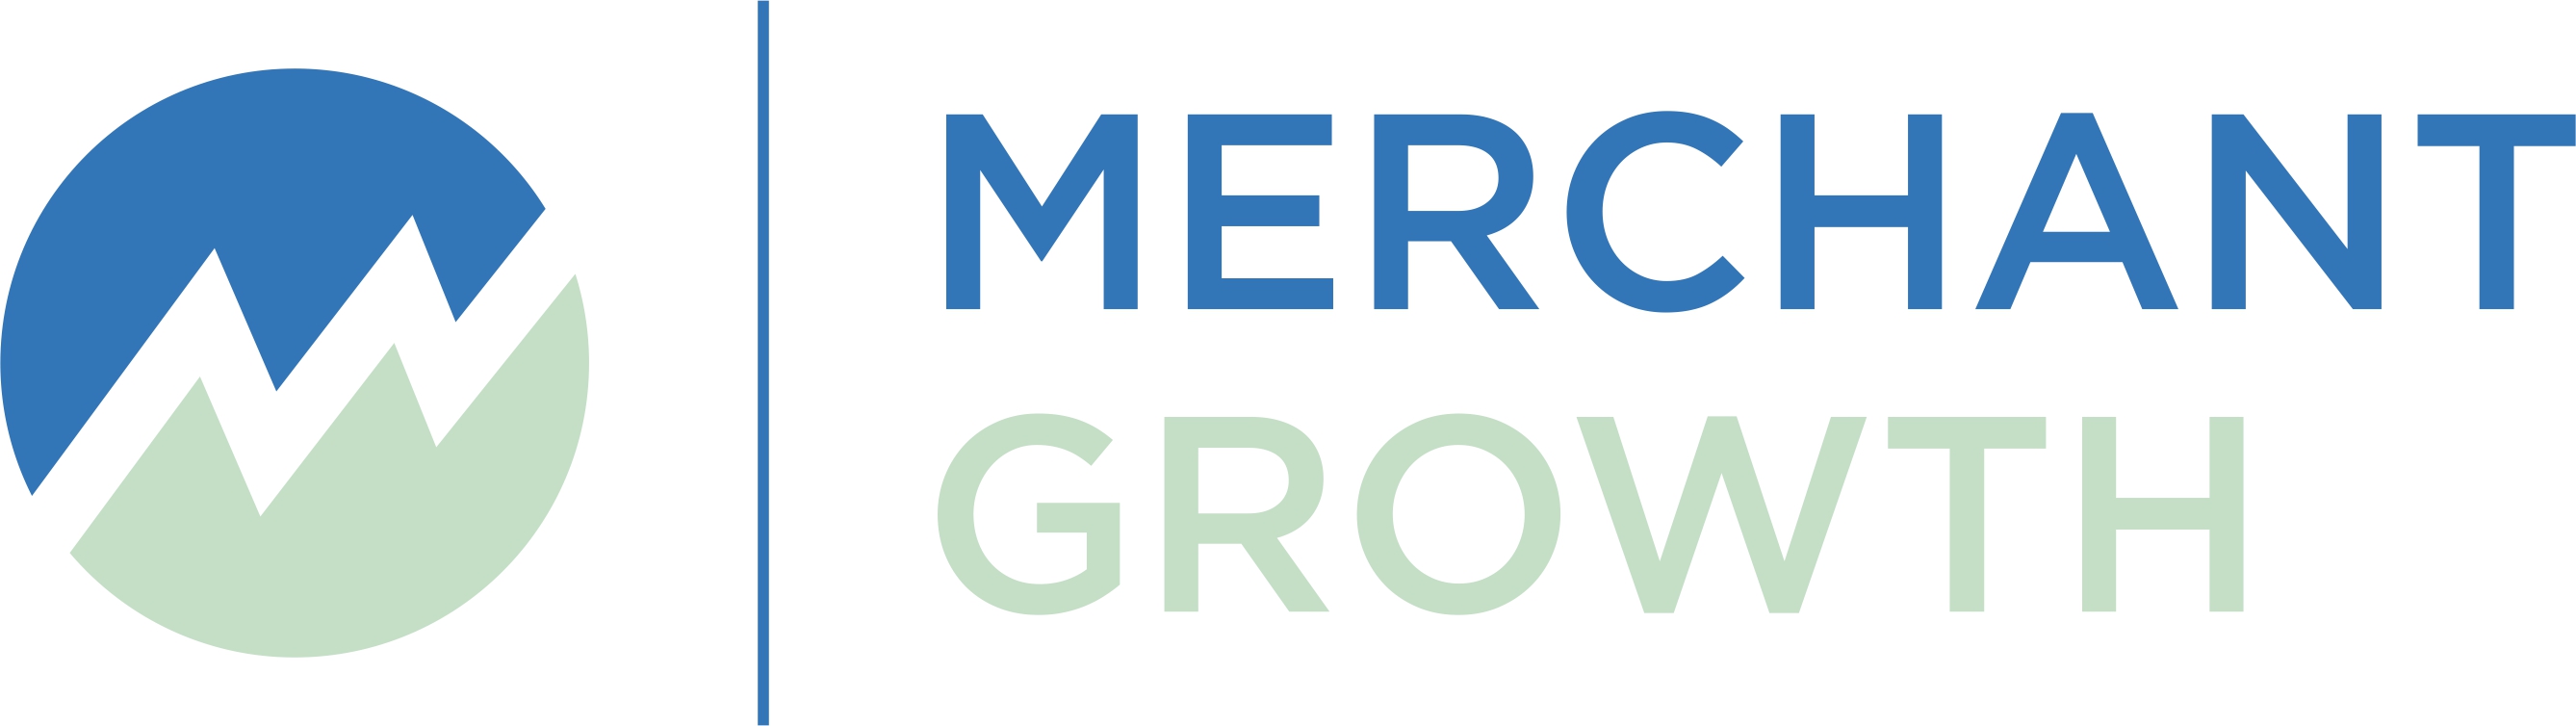 Merchant Growth - Small Business Financing Made Simple